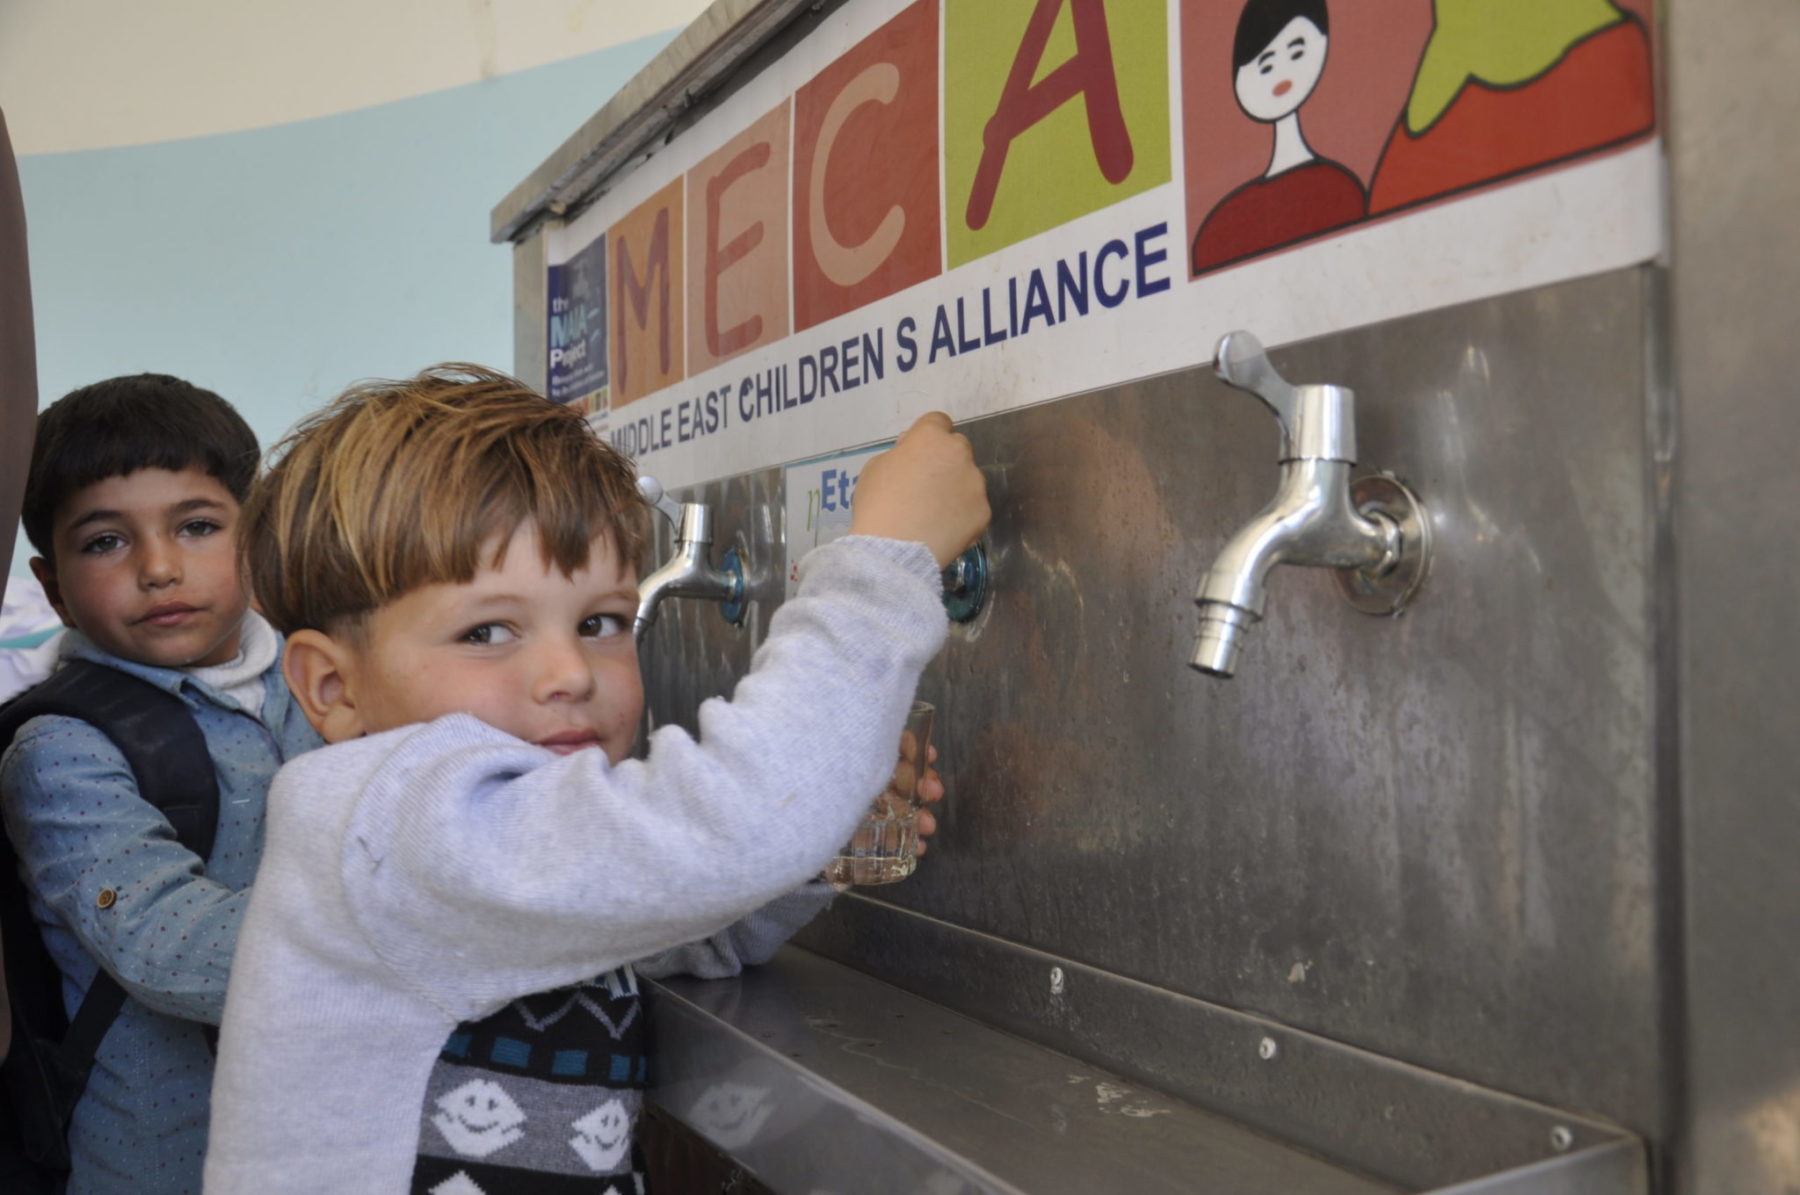 The Middle East Children’s Alliance (MECA) - providing water to Palestinian children